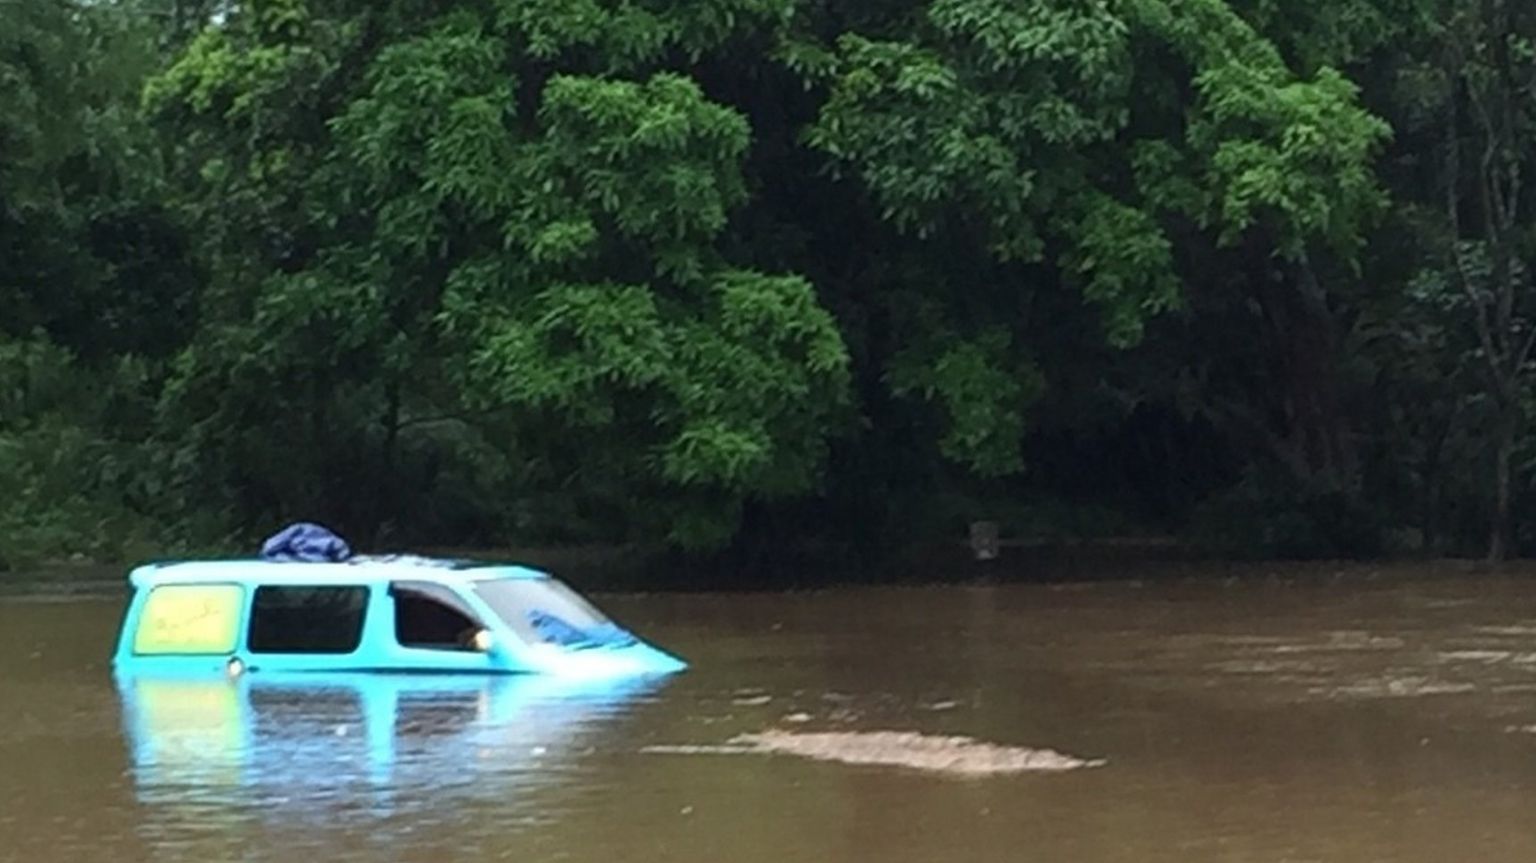 A half-submerged van in a flooded river in Australia